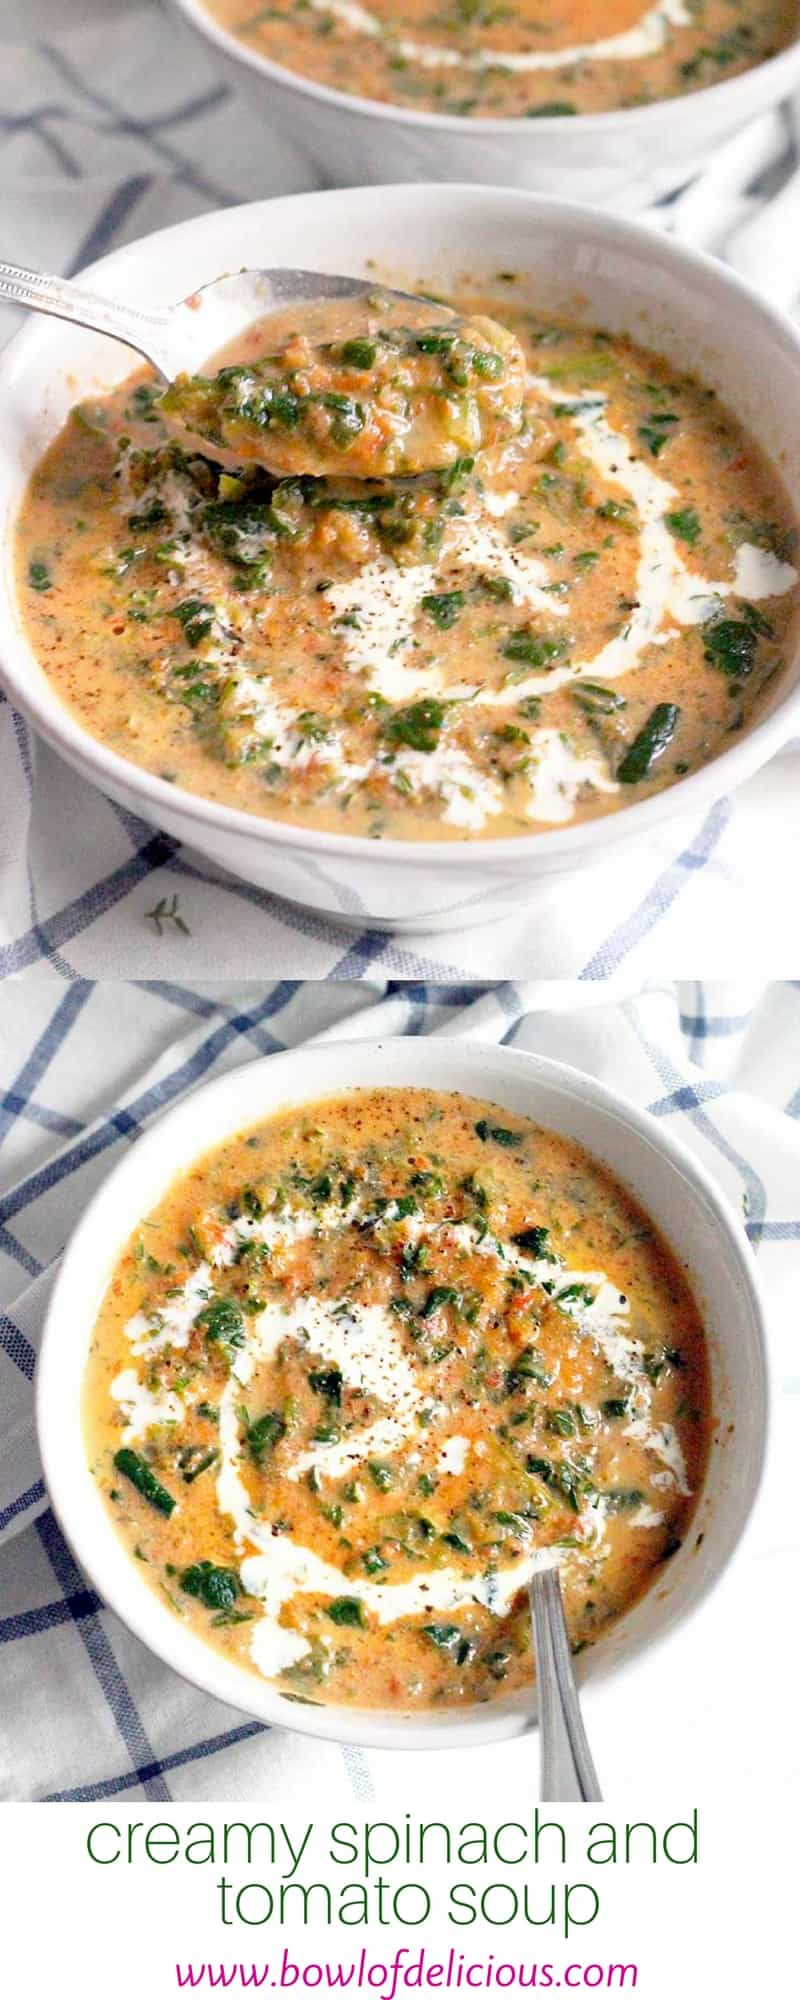 This Creamy Tomato and Spinach Soup is so simple, and decadent tasting, and it's packed with healthy spinach, carrots, and tomatoes!